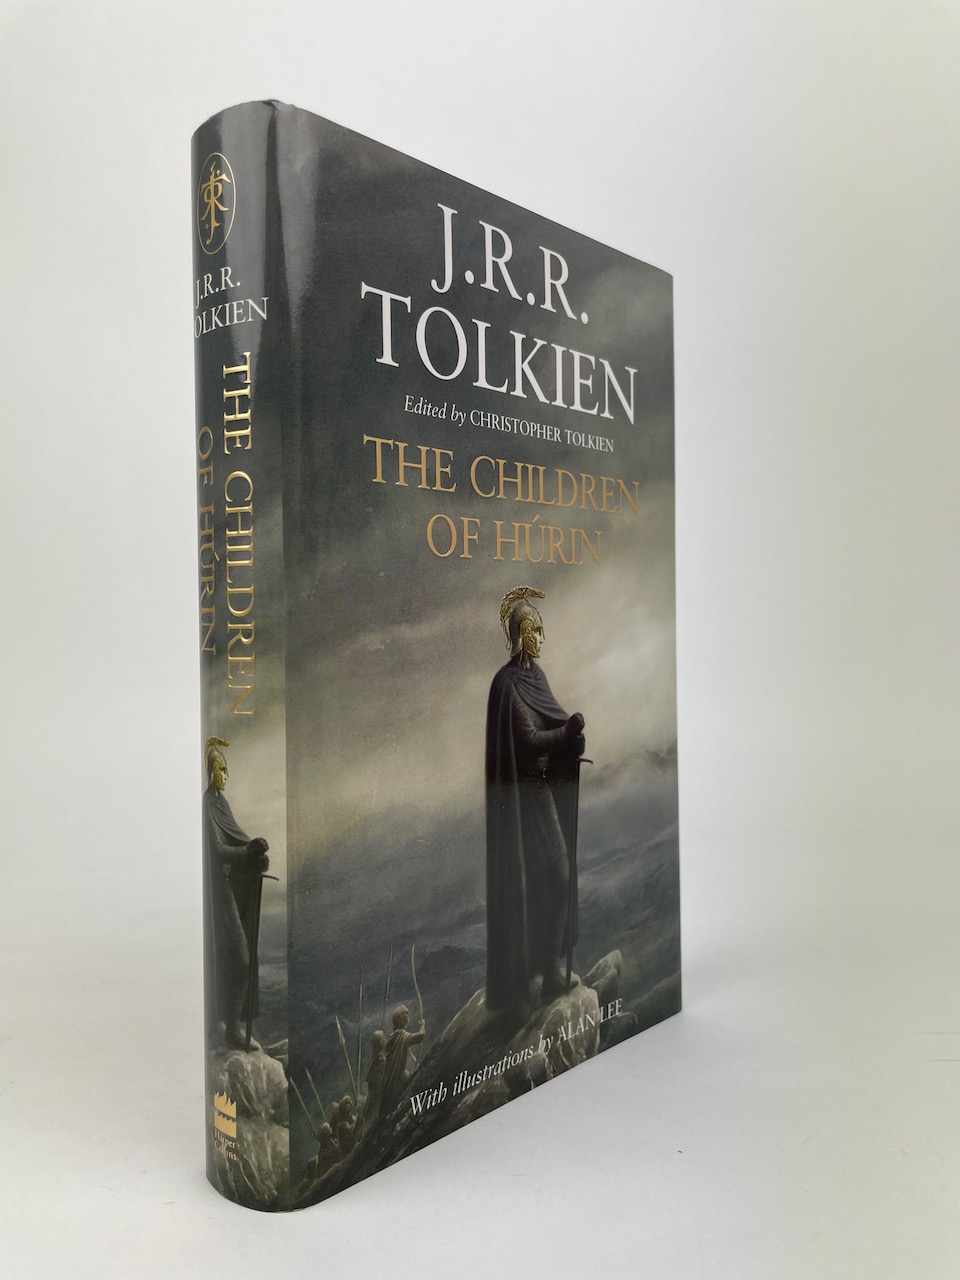 UK 1st Edition of The Children of Hurin, signed by Christopher Tolkien, Allan Lee and Bernard Hill 2